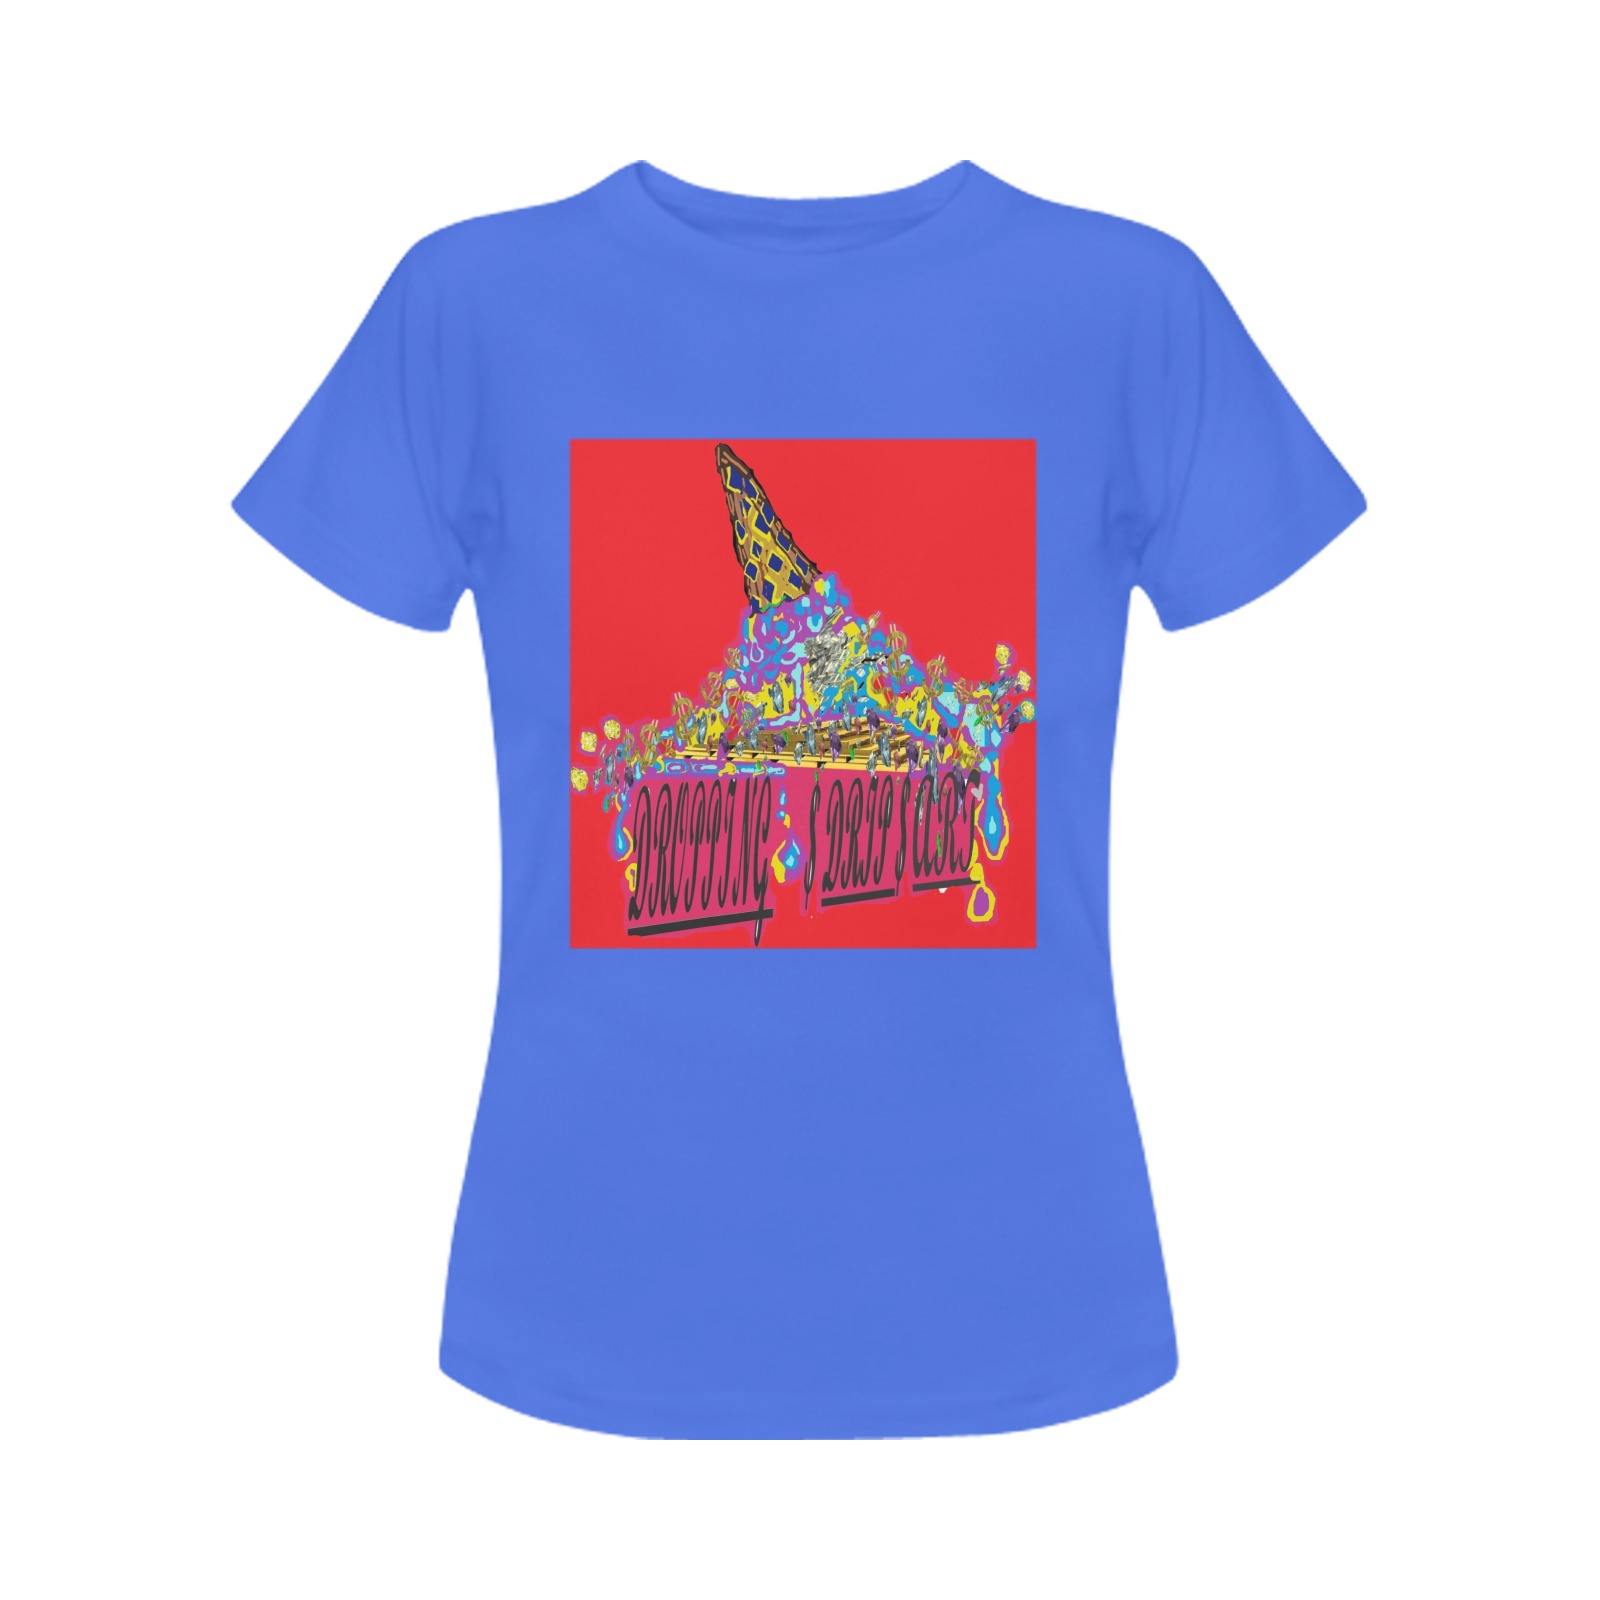 D.D.A.LOGO.BLU.RED. Women's T-Shirt in USA Size (Front Printing Only)